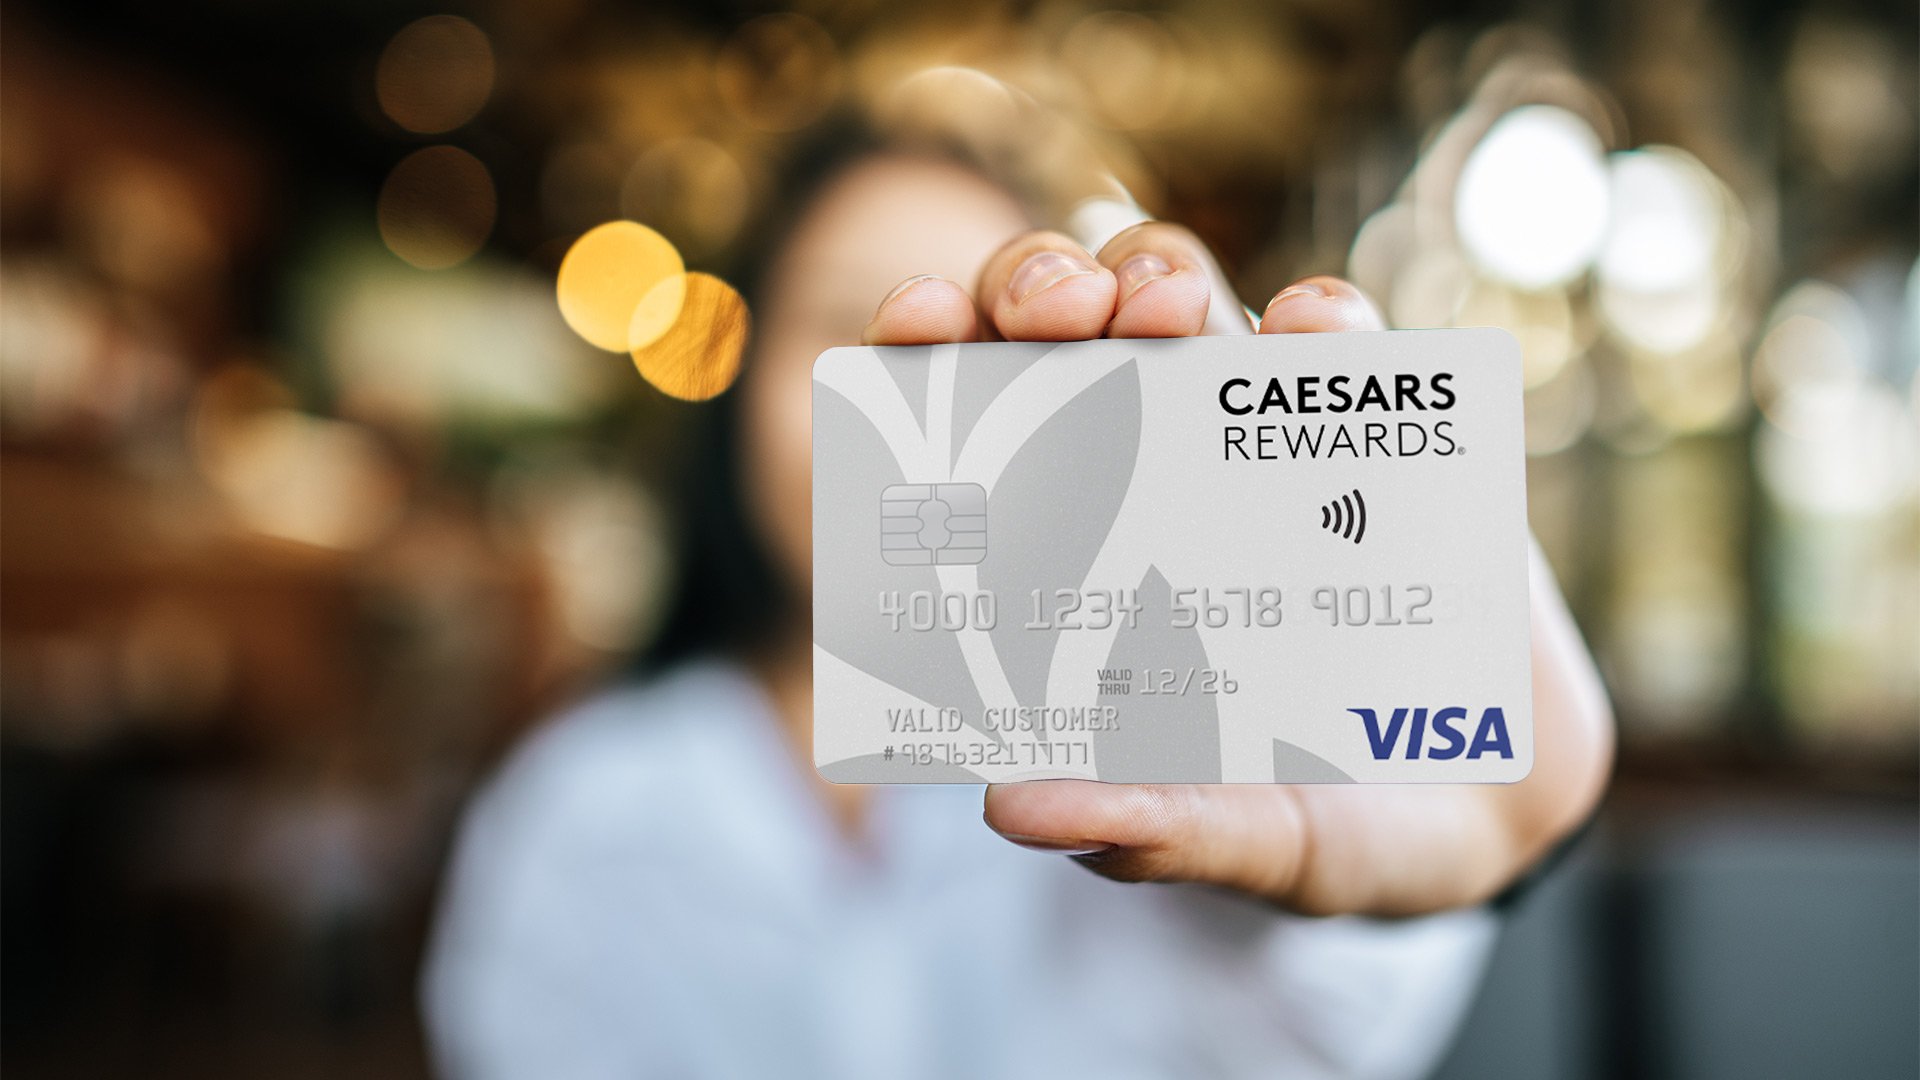 Caesars expands loyalty program to add Tier Credits that raise members